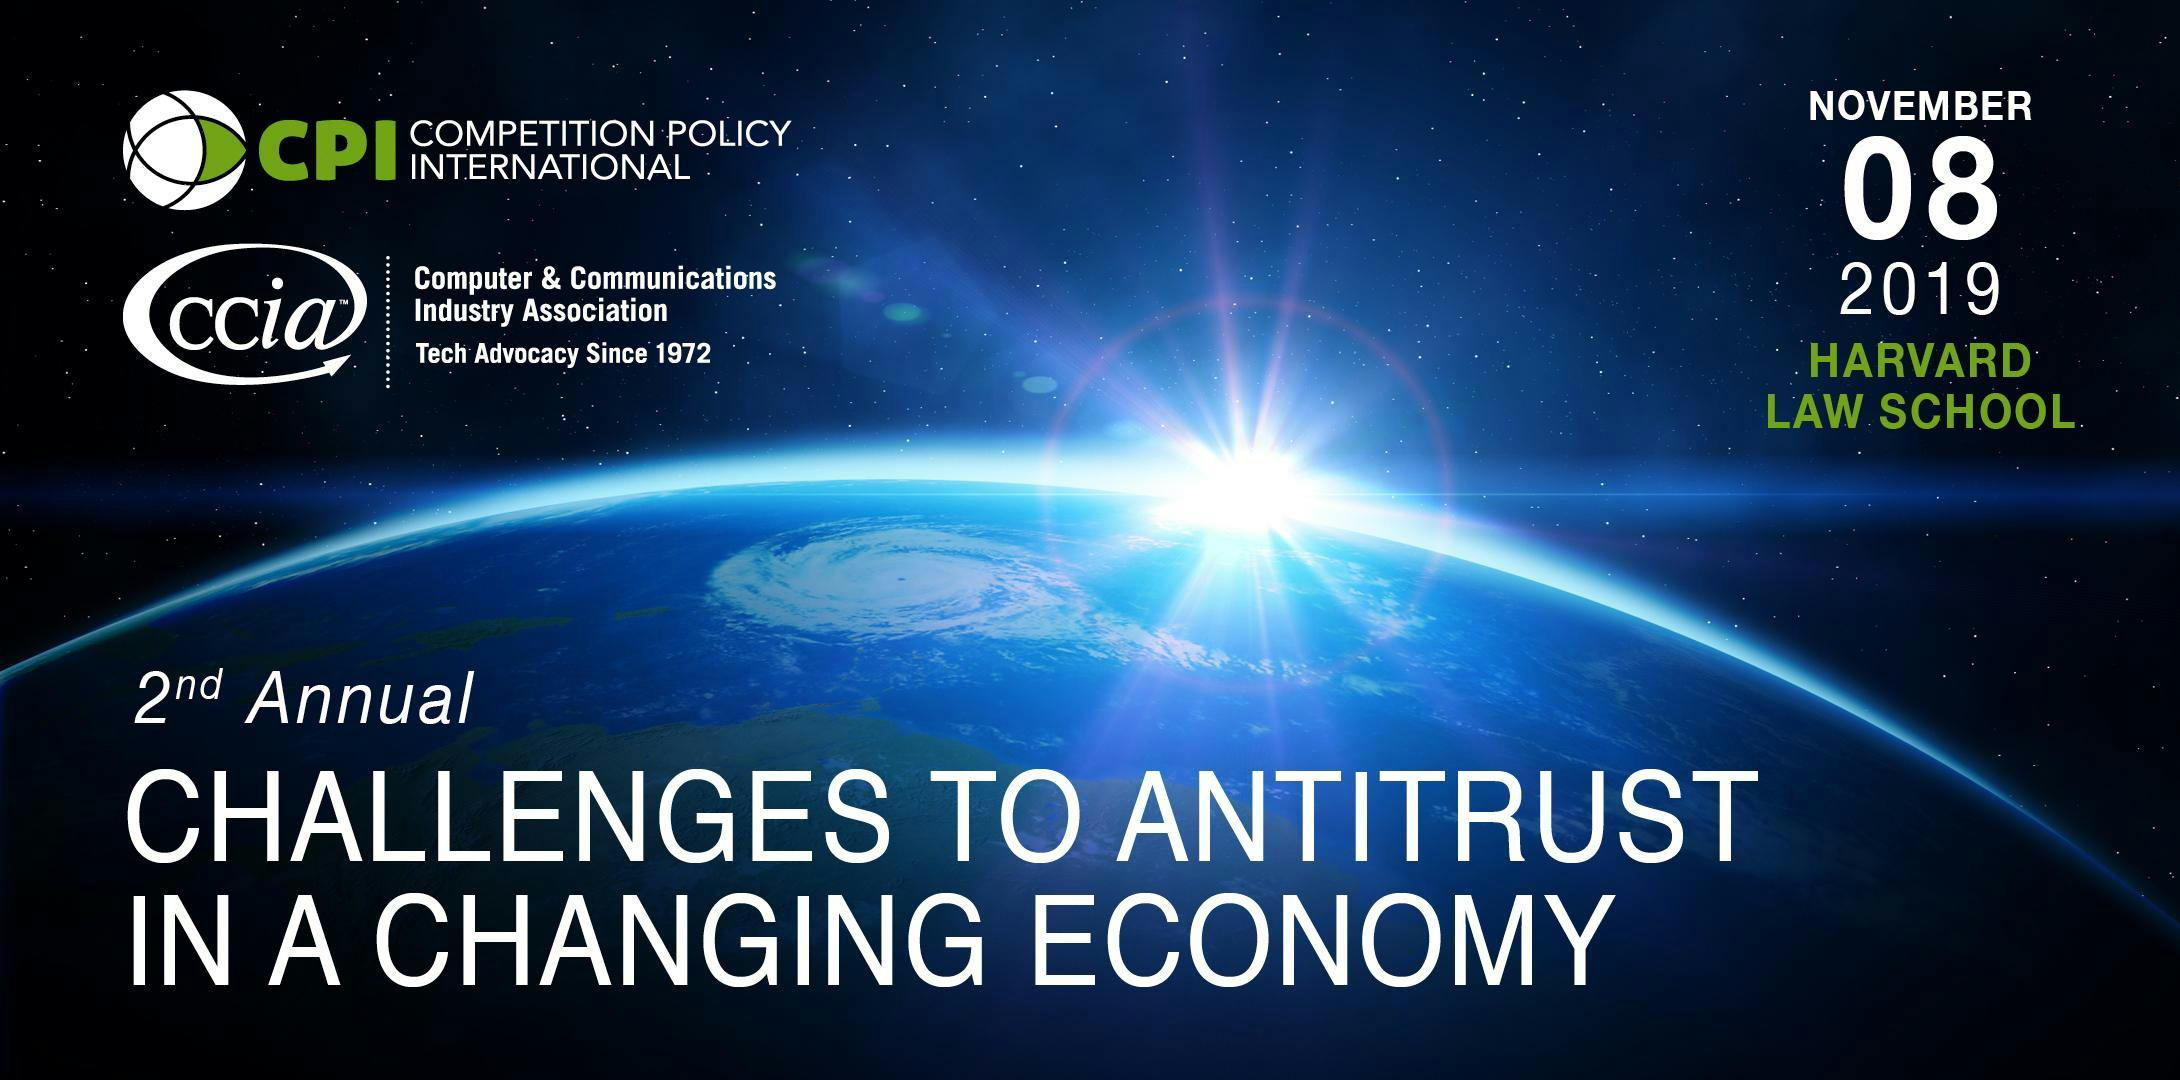 2nd Annual Challenges to Antitrust in a Changing Economy